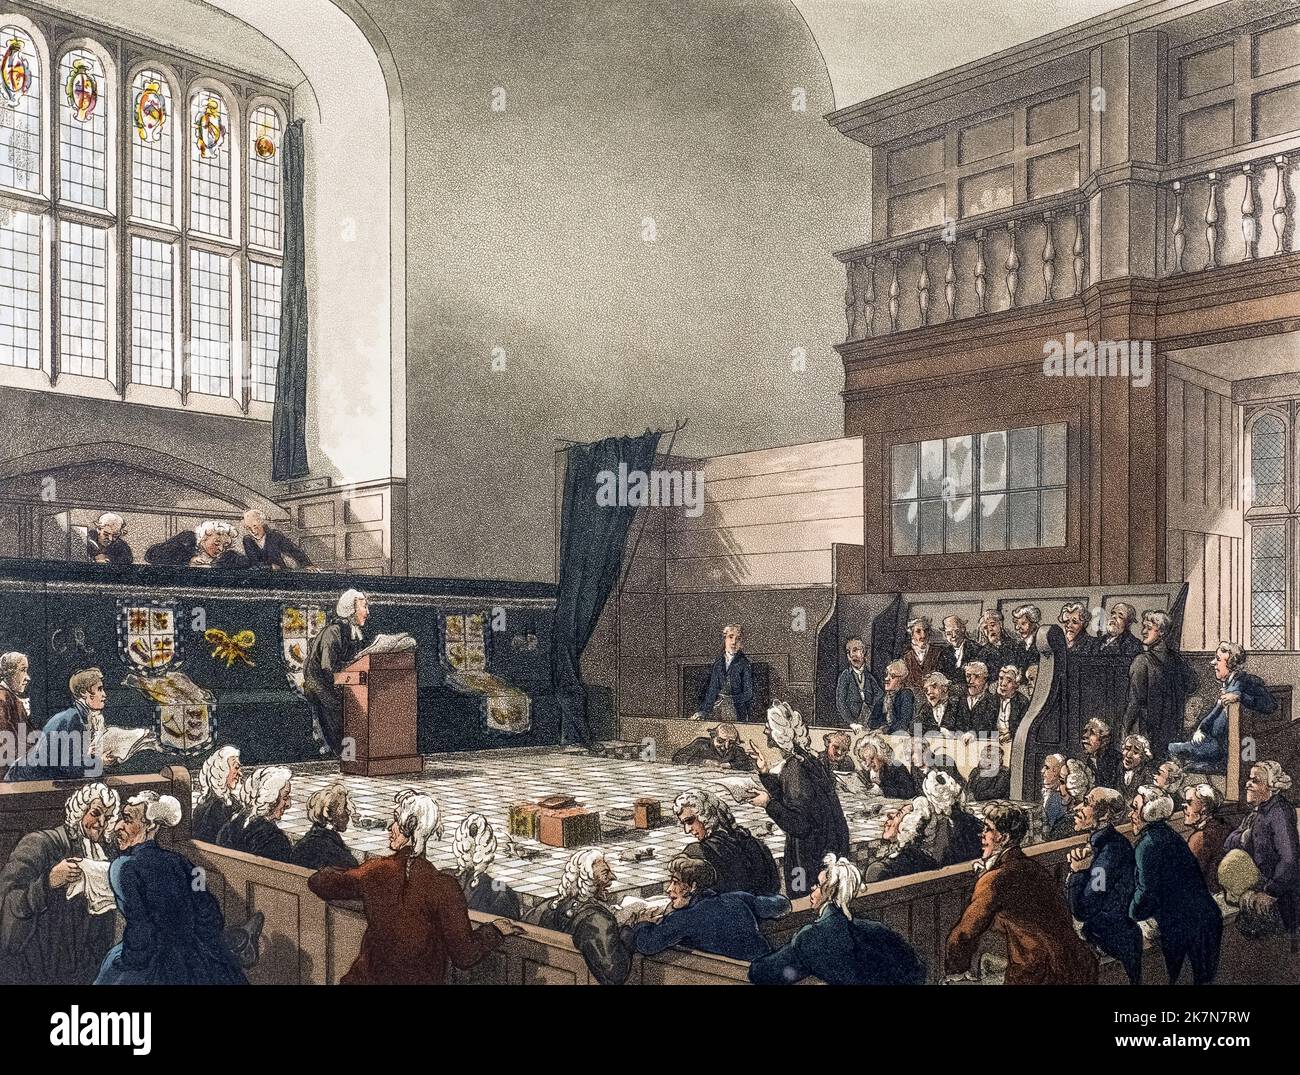 Court of Exchequer, Westminster Hall.  Circa 1808.  After a work by August Pugin and Thomas Rowlandson in the Microcosm of London, published in three volumes between 1808 and 1810 by Rudolph Ackermann.   Pugin was the artist responsible for the architectural elements in the Microcosm pictures; Thomas Rowlandson was hired to add the lively human figures. Stock Photo